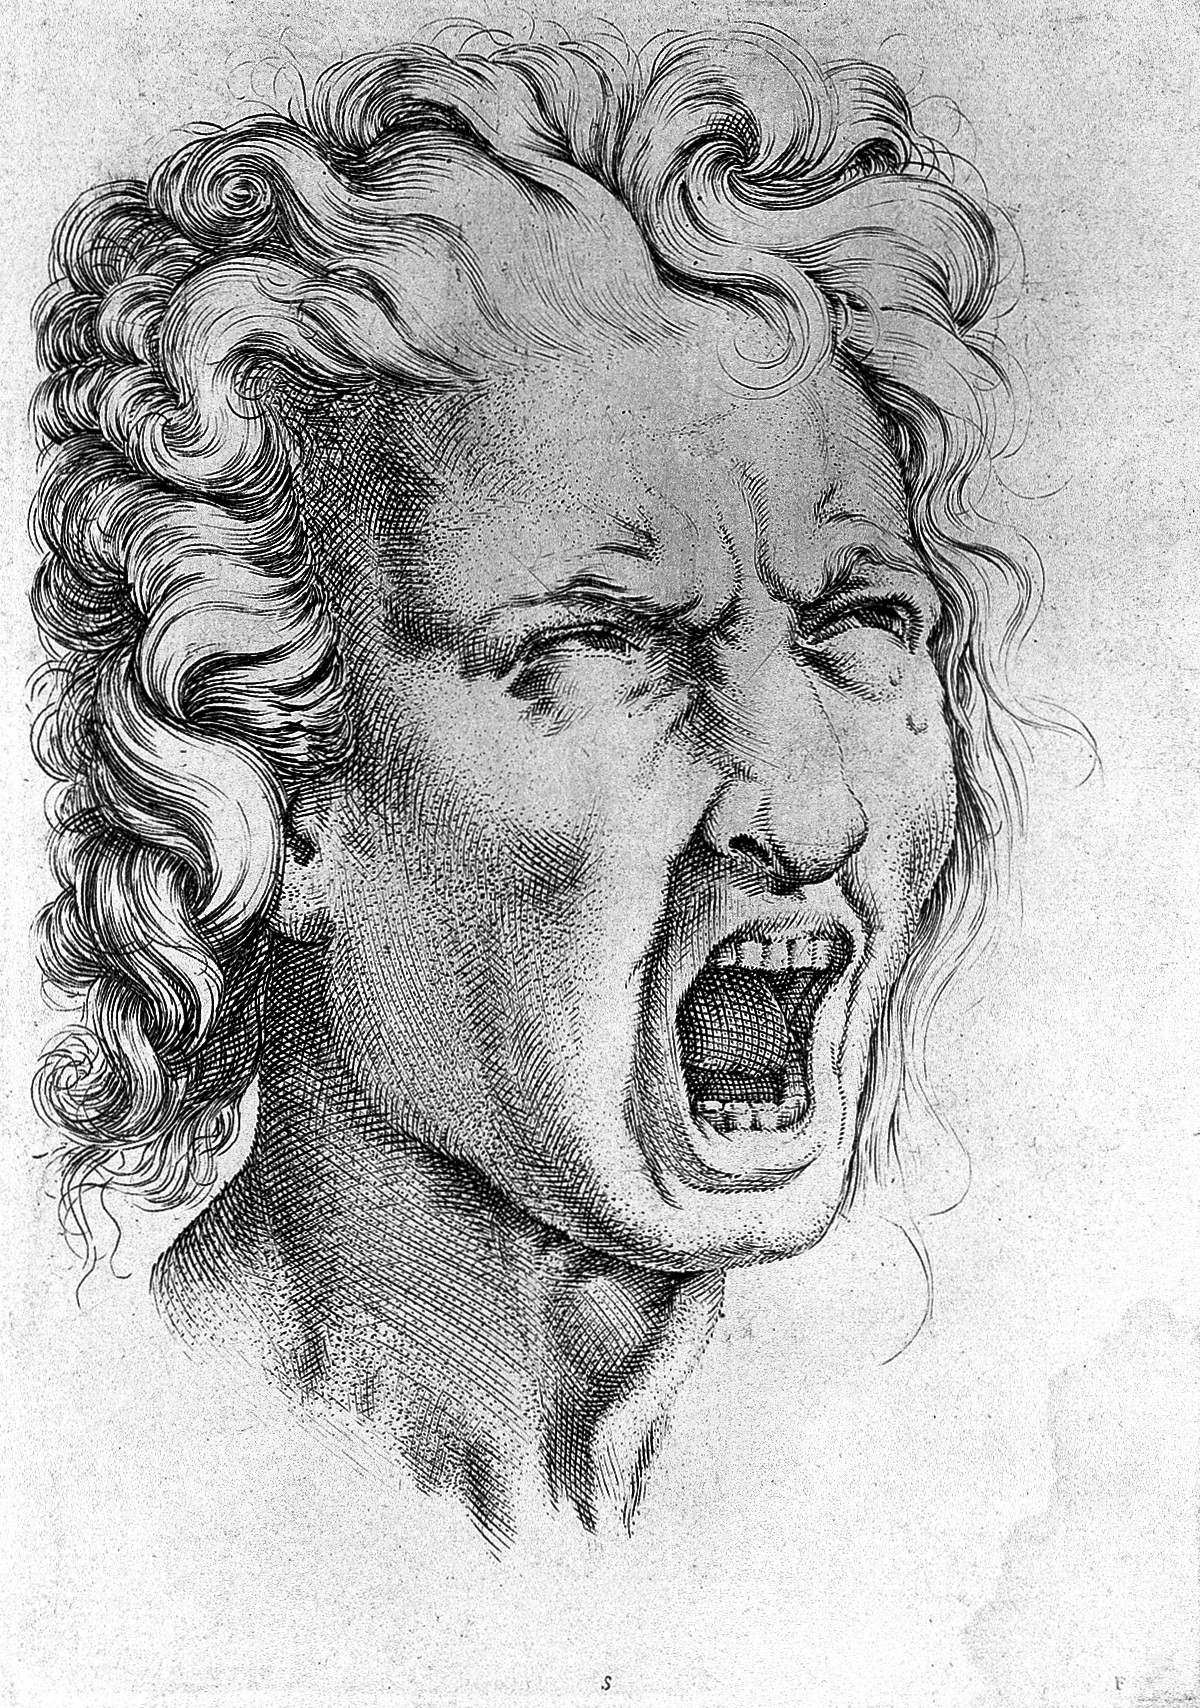 Black and white line engraving showing a screaming man’s face.